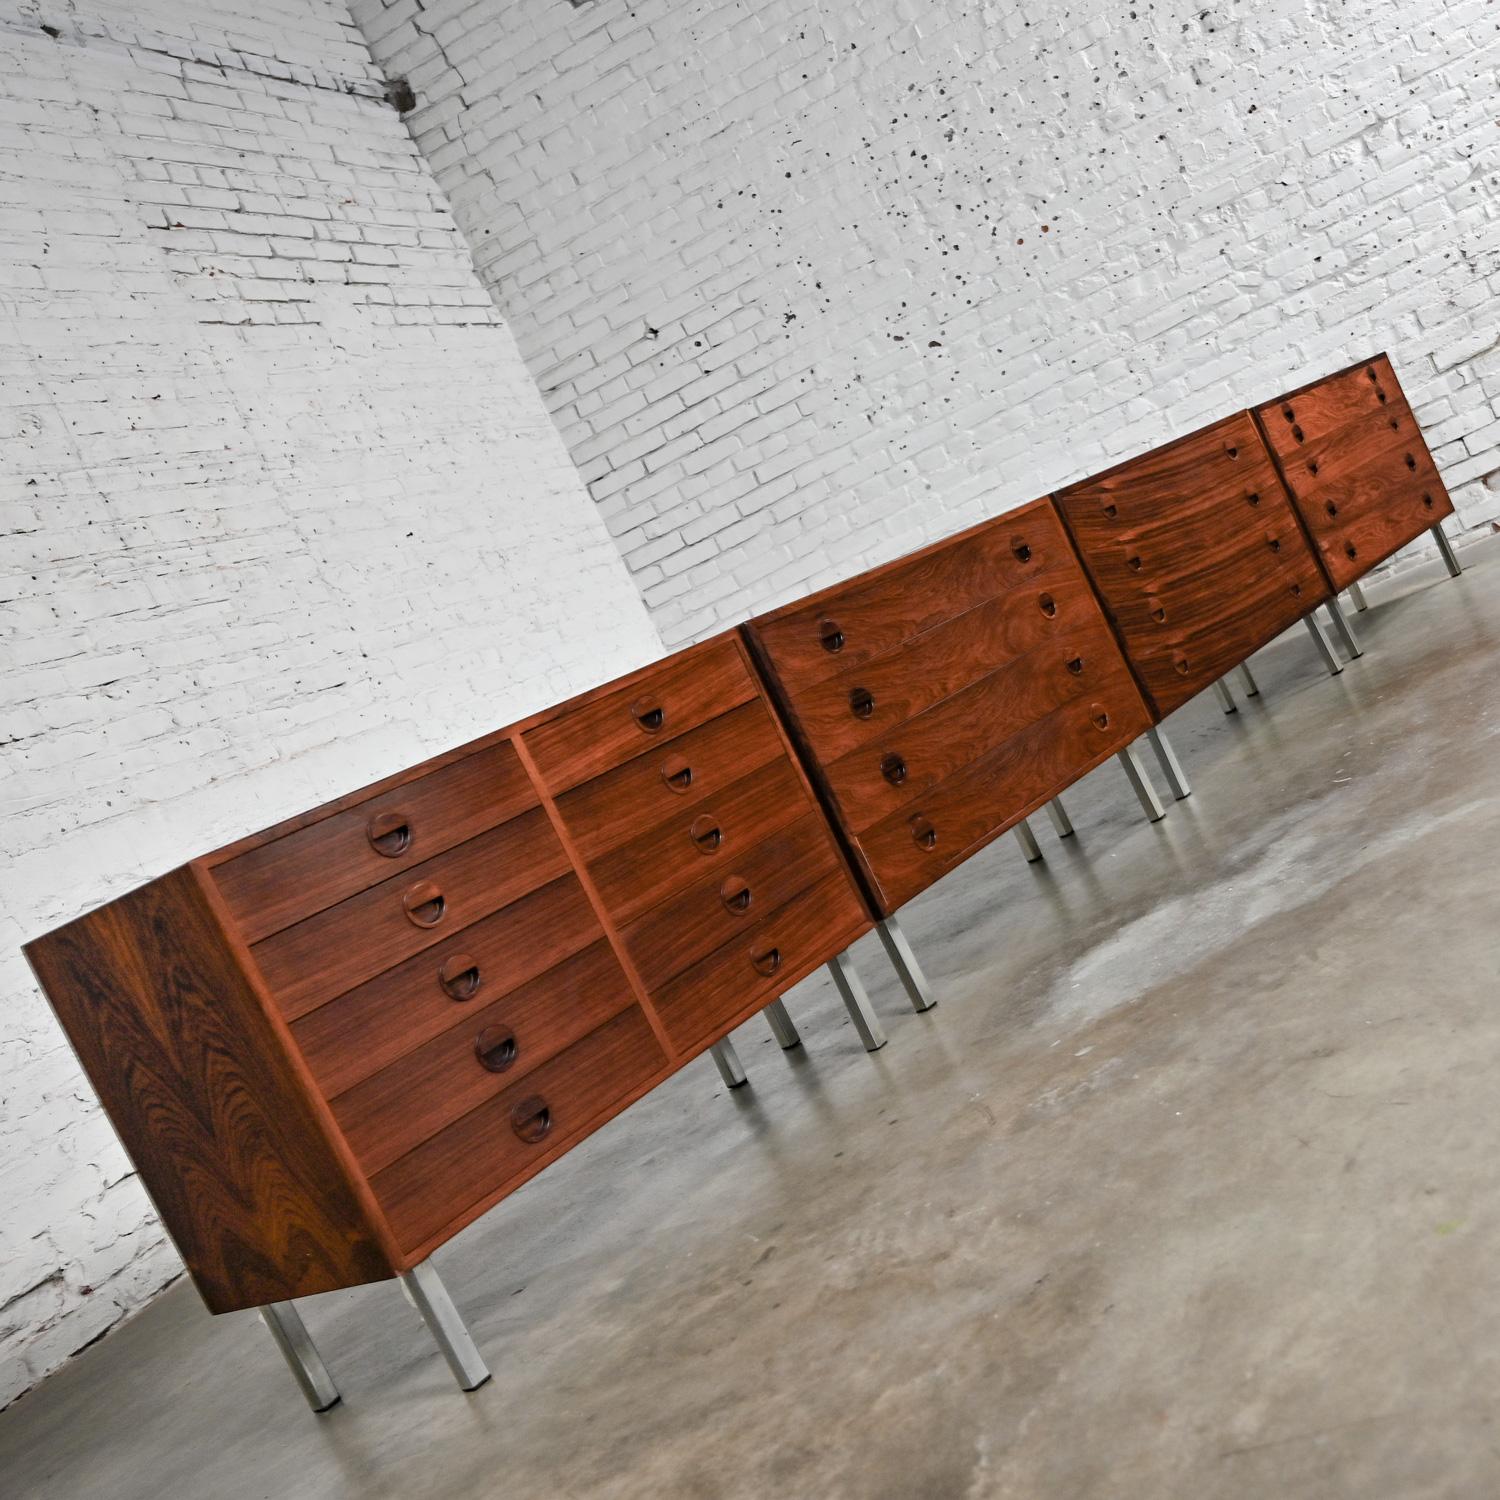 Handsome Mid Century Scandinavian Modern cabinets by Rud Thygesen & Johnny Sorensen for Hansen & Guldborg (a.k.a. HG,). These cabinets are comprised of rosewood with square steel tube legs, a set of 4. They also have a hanging mechanism on the back